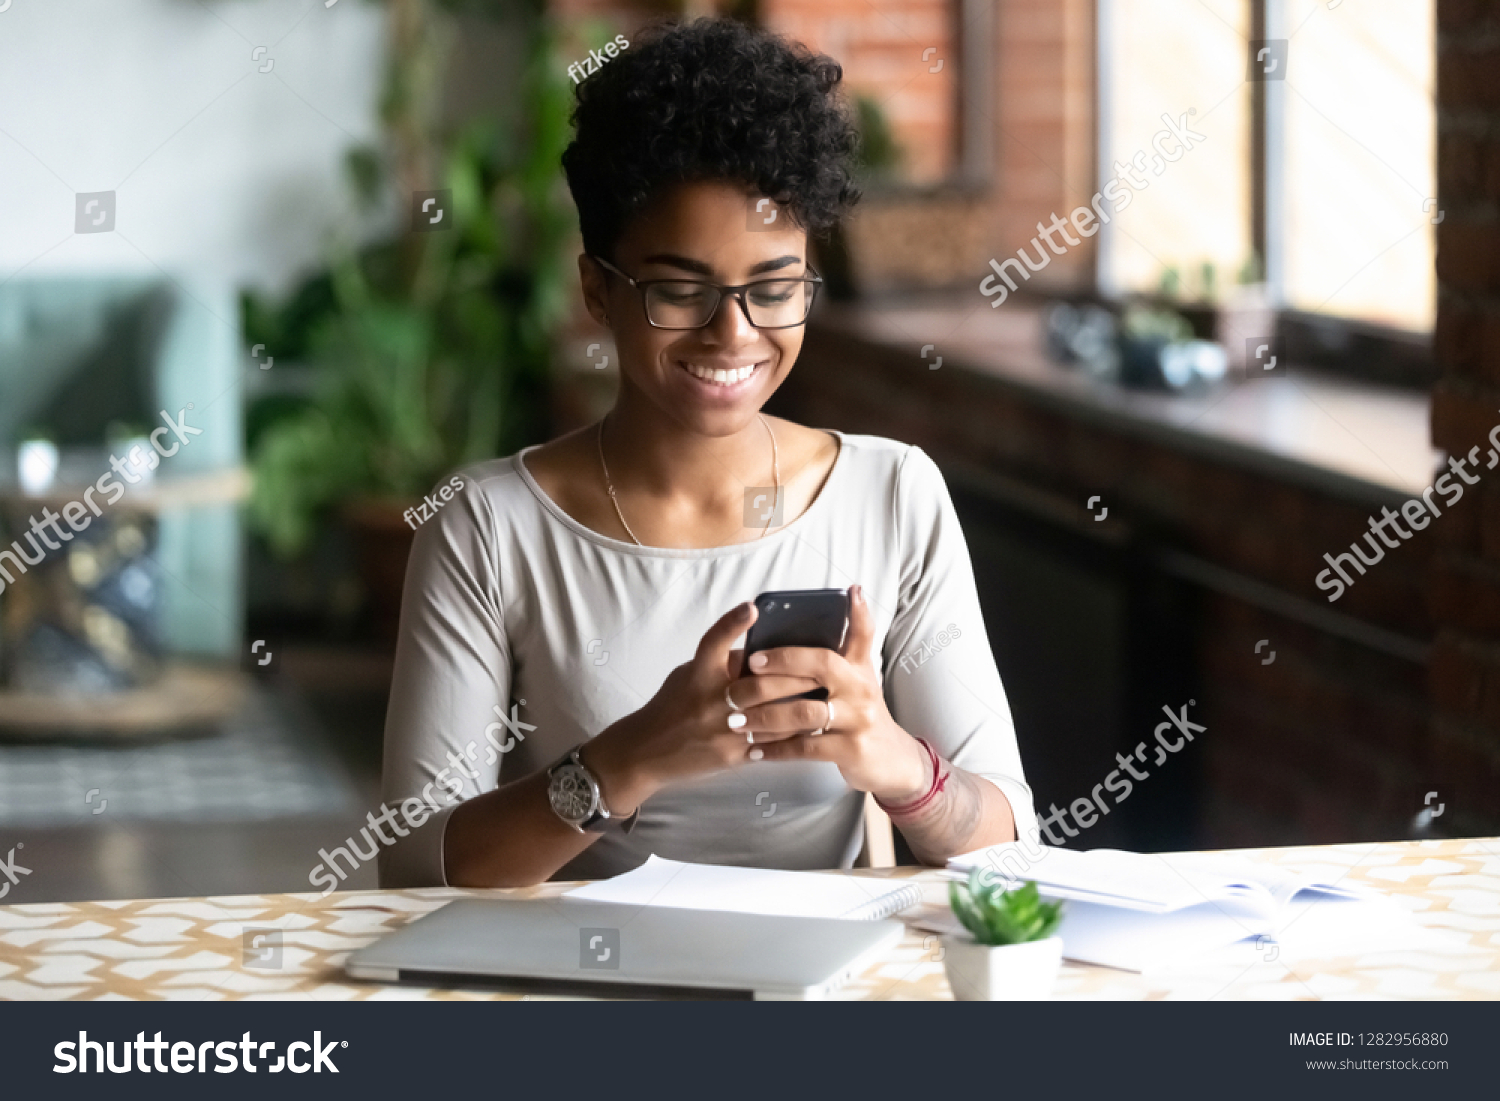 Cheerful african student black woman sitting at table studying using laptop reading a book, take a break holding mobile phone surfing internet received message from friend chatting about weekend plans #1282956880